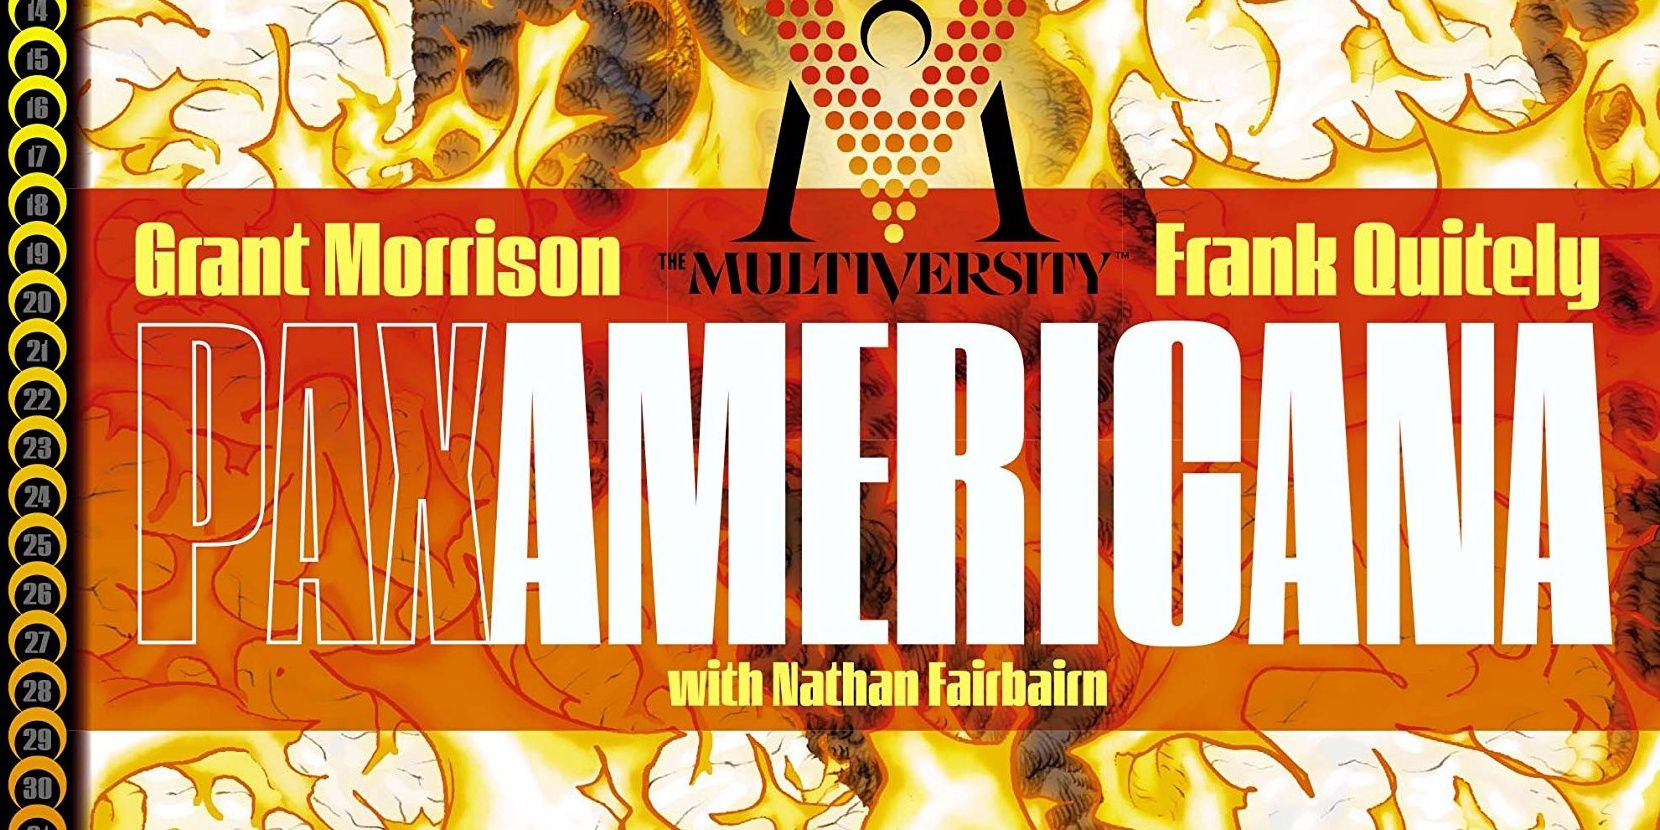 Pax Americana comic cover in flames from the Multiversity